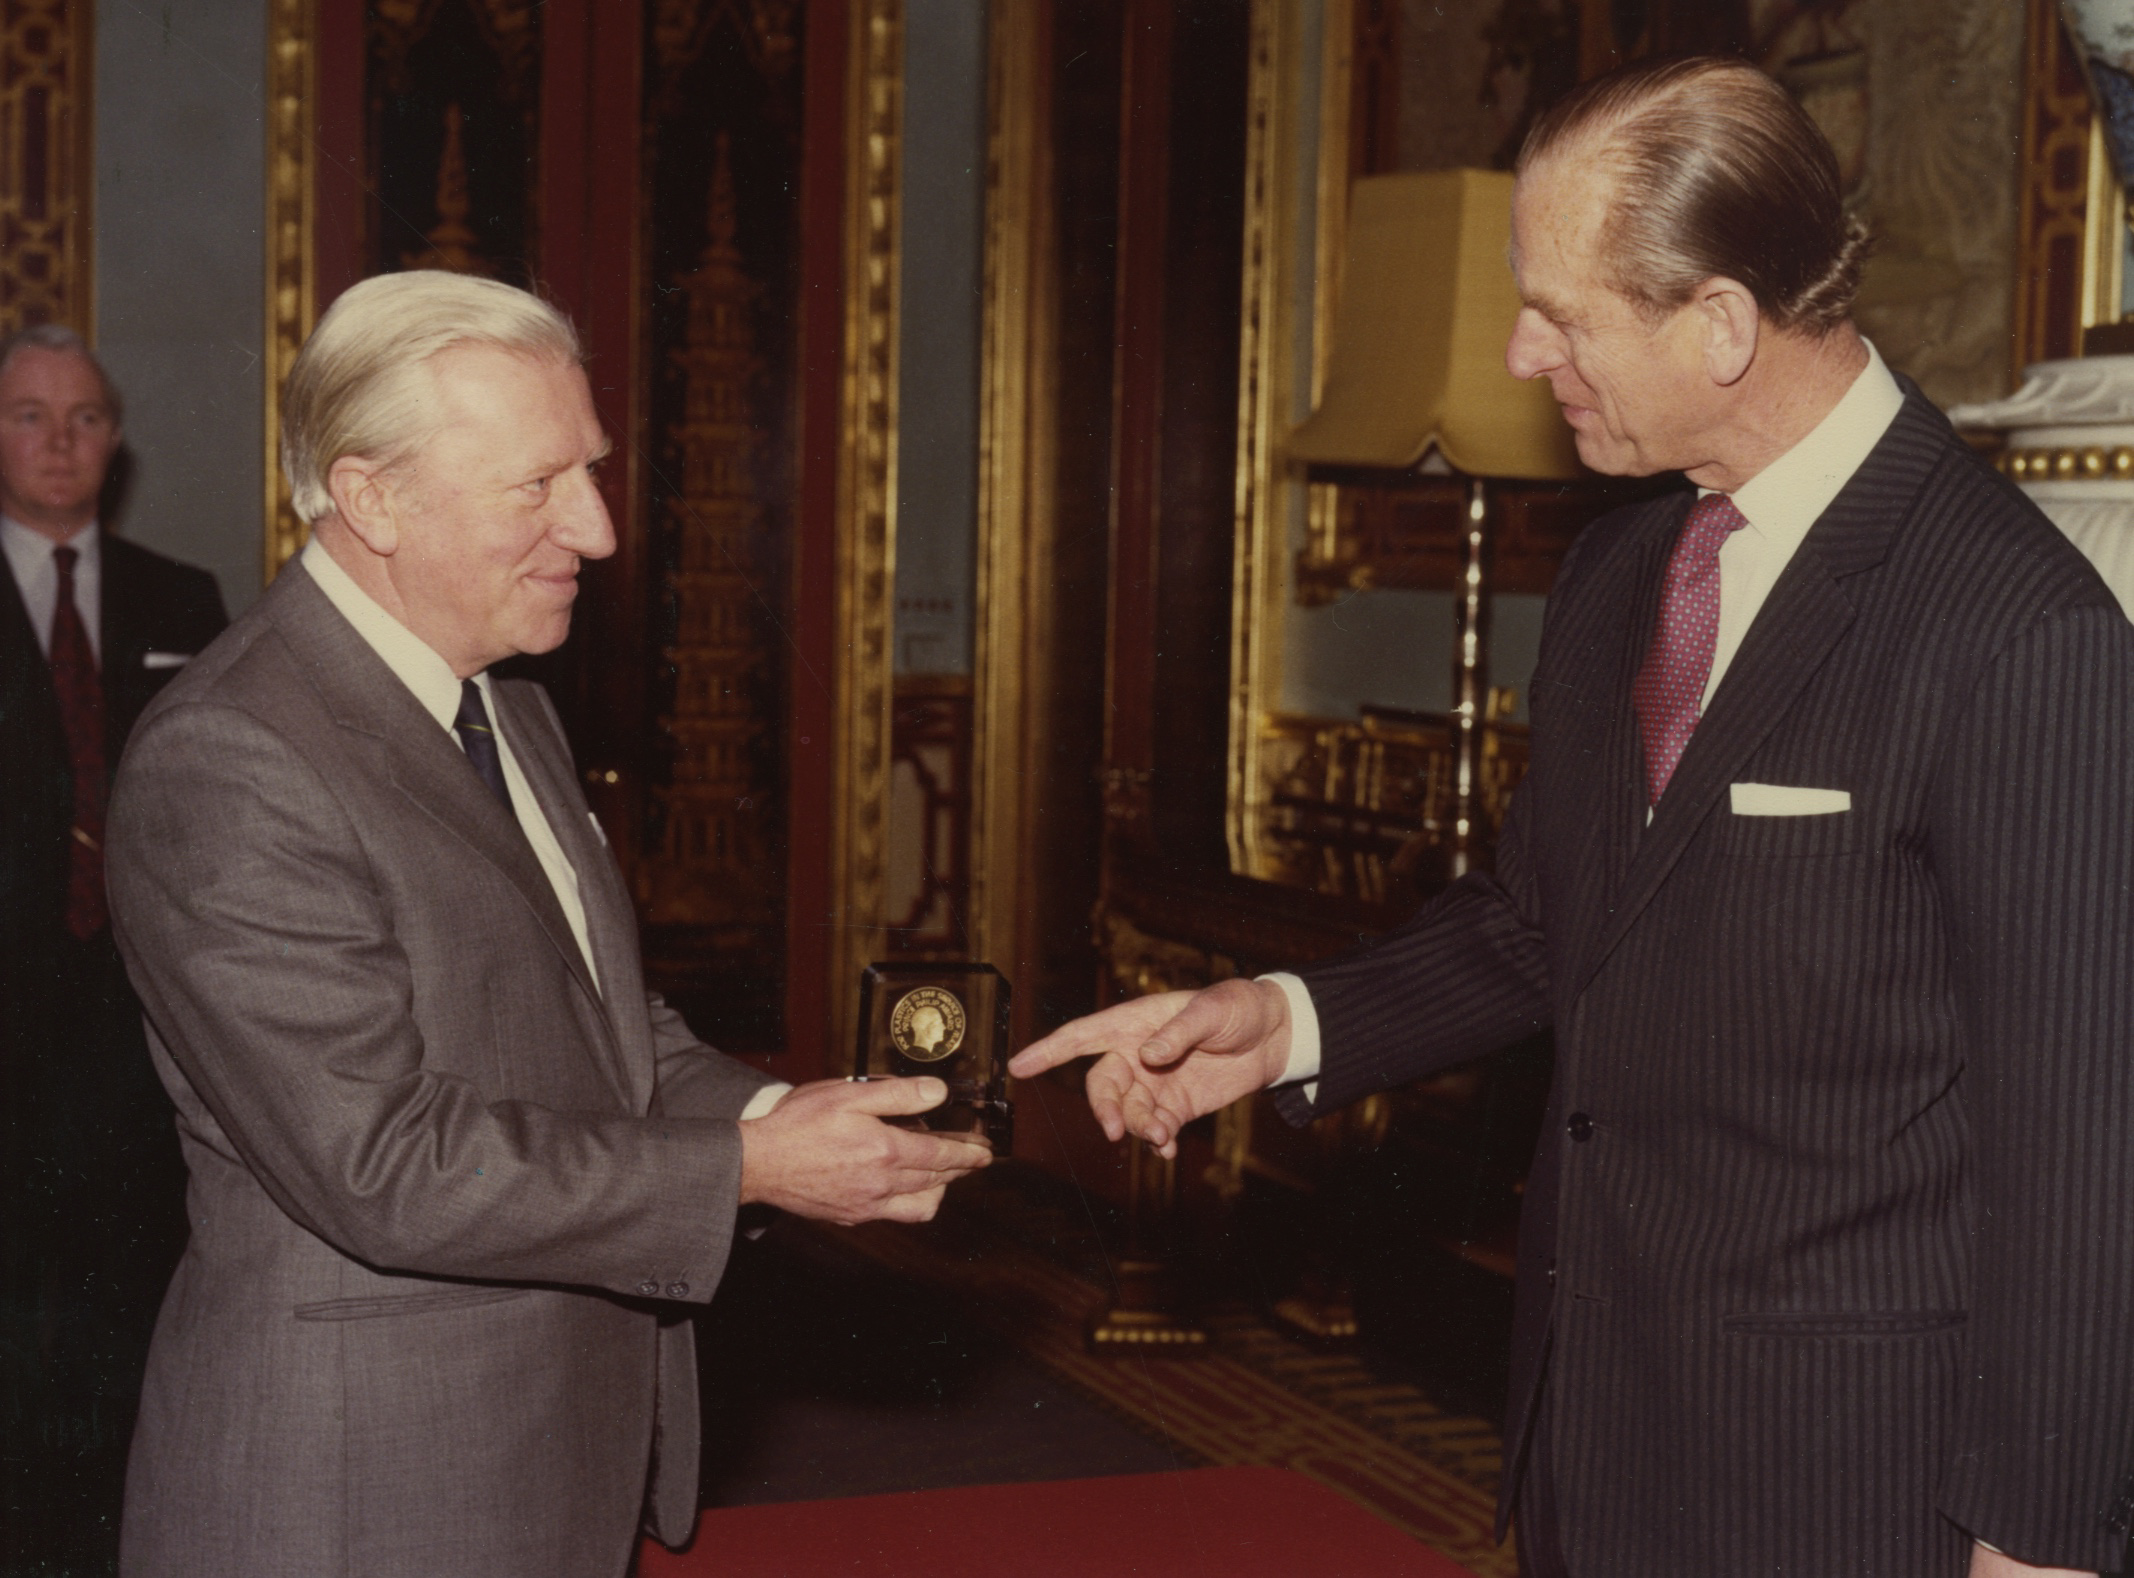 1981: Prince Philip, Duke of Edinburgh, presents the company with a gold medal in recognition of the contribution of Plastazote® polyethylene foam in the service of man